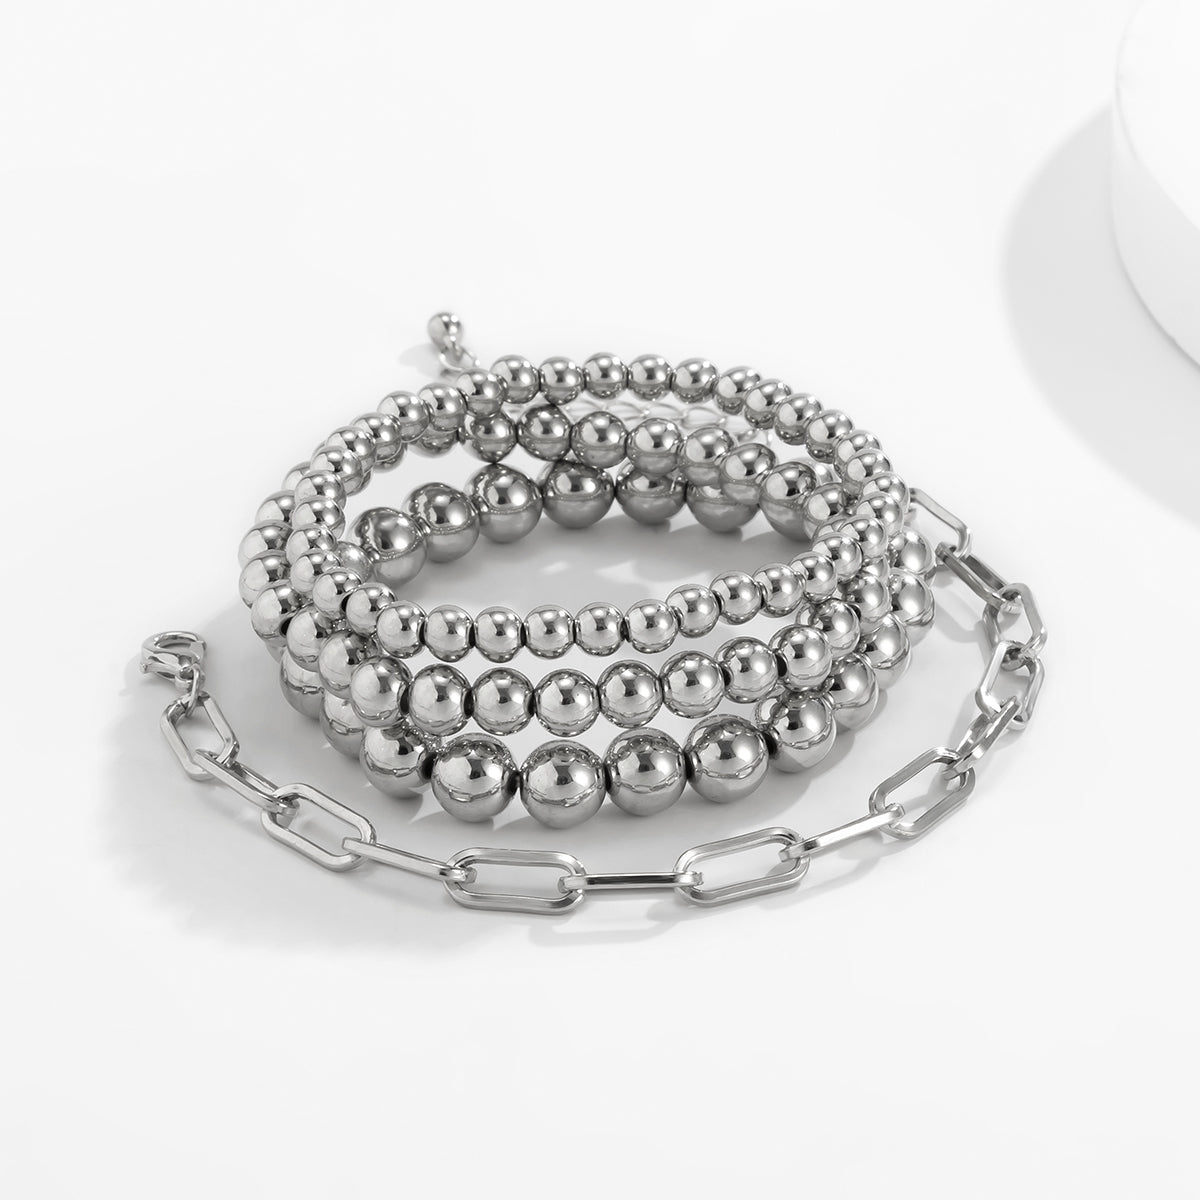 Silver-Plated Beaded Chain Stretch Bracelet Set